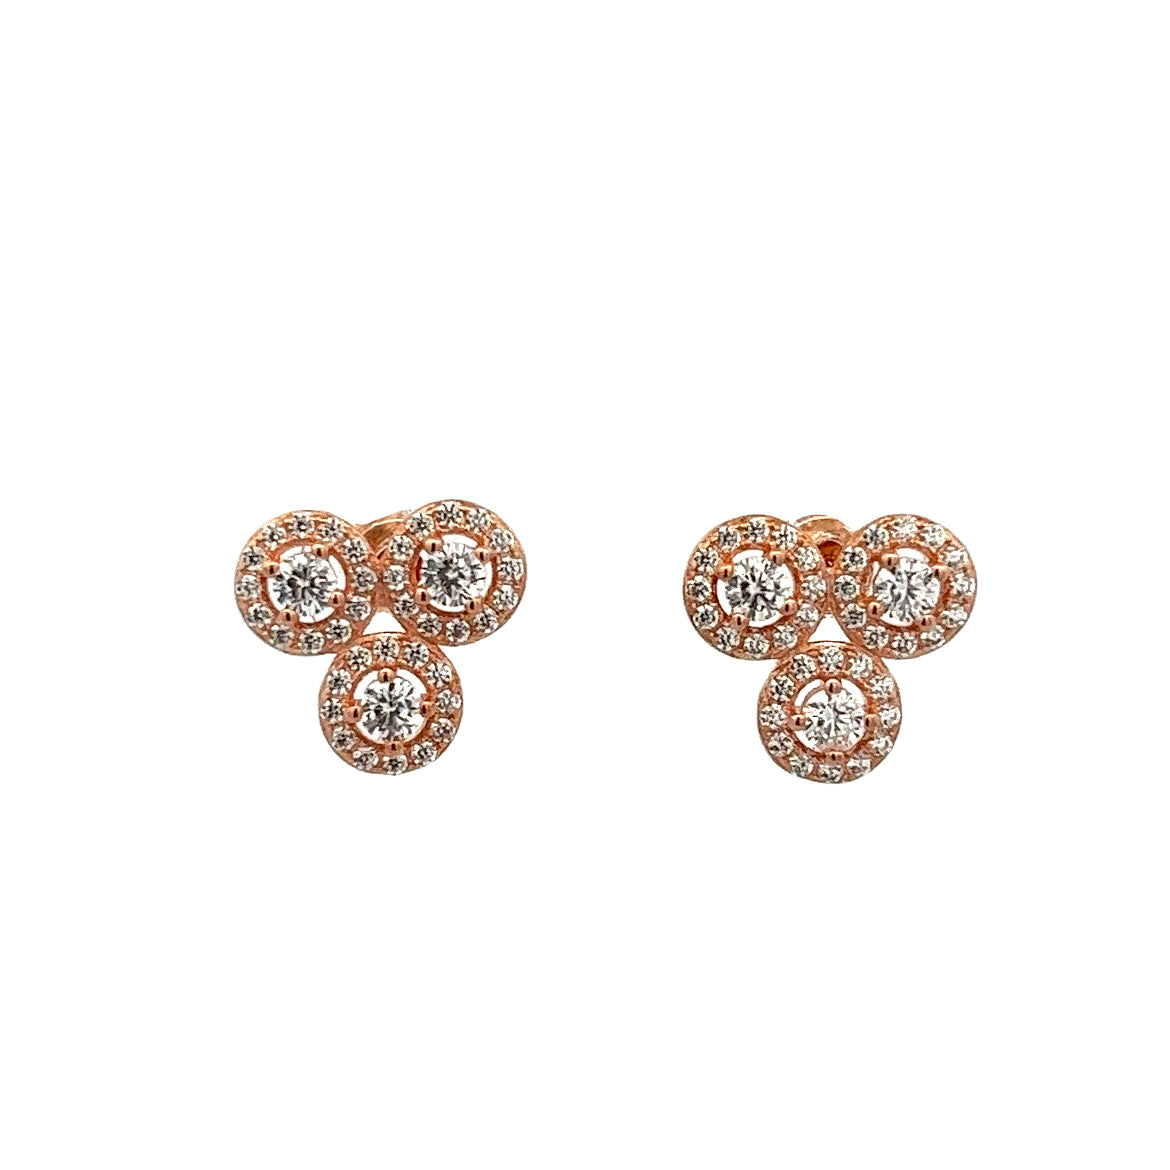 925 SILVER ROSE GOLD HALO TRINTIY EARRINGS